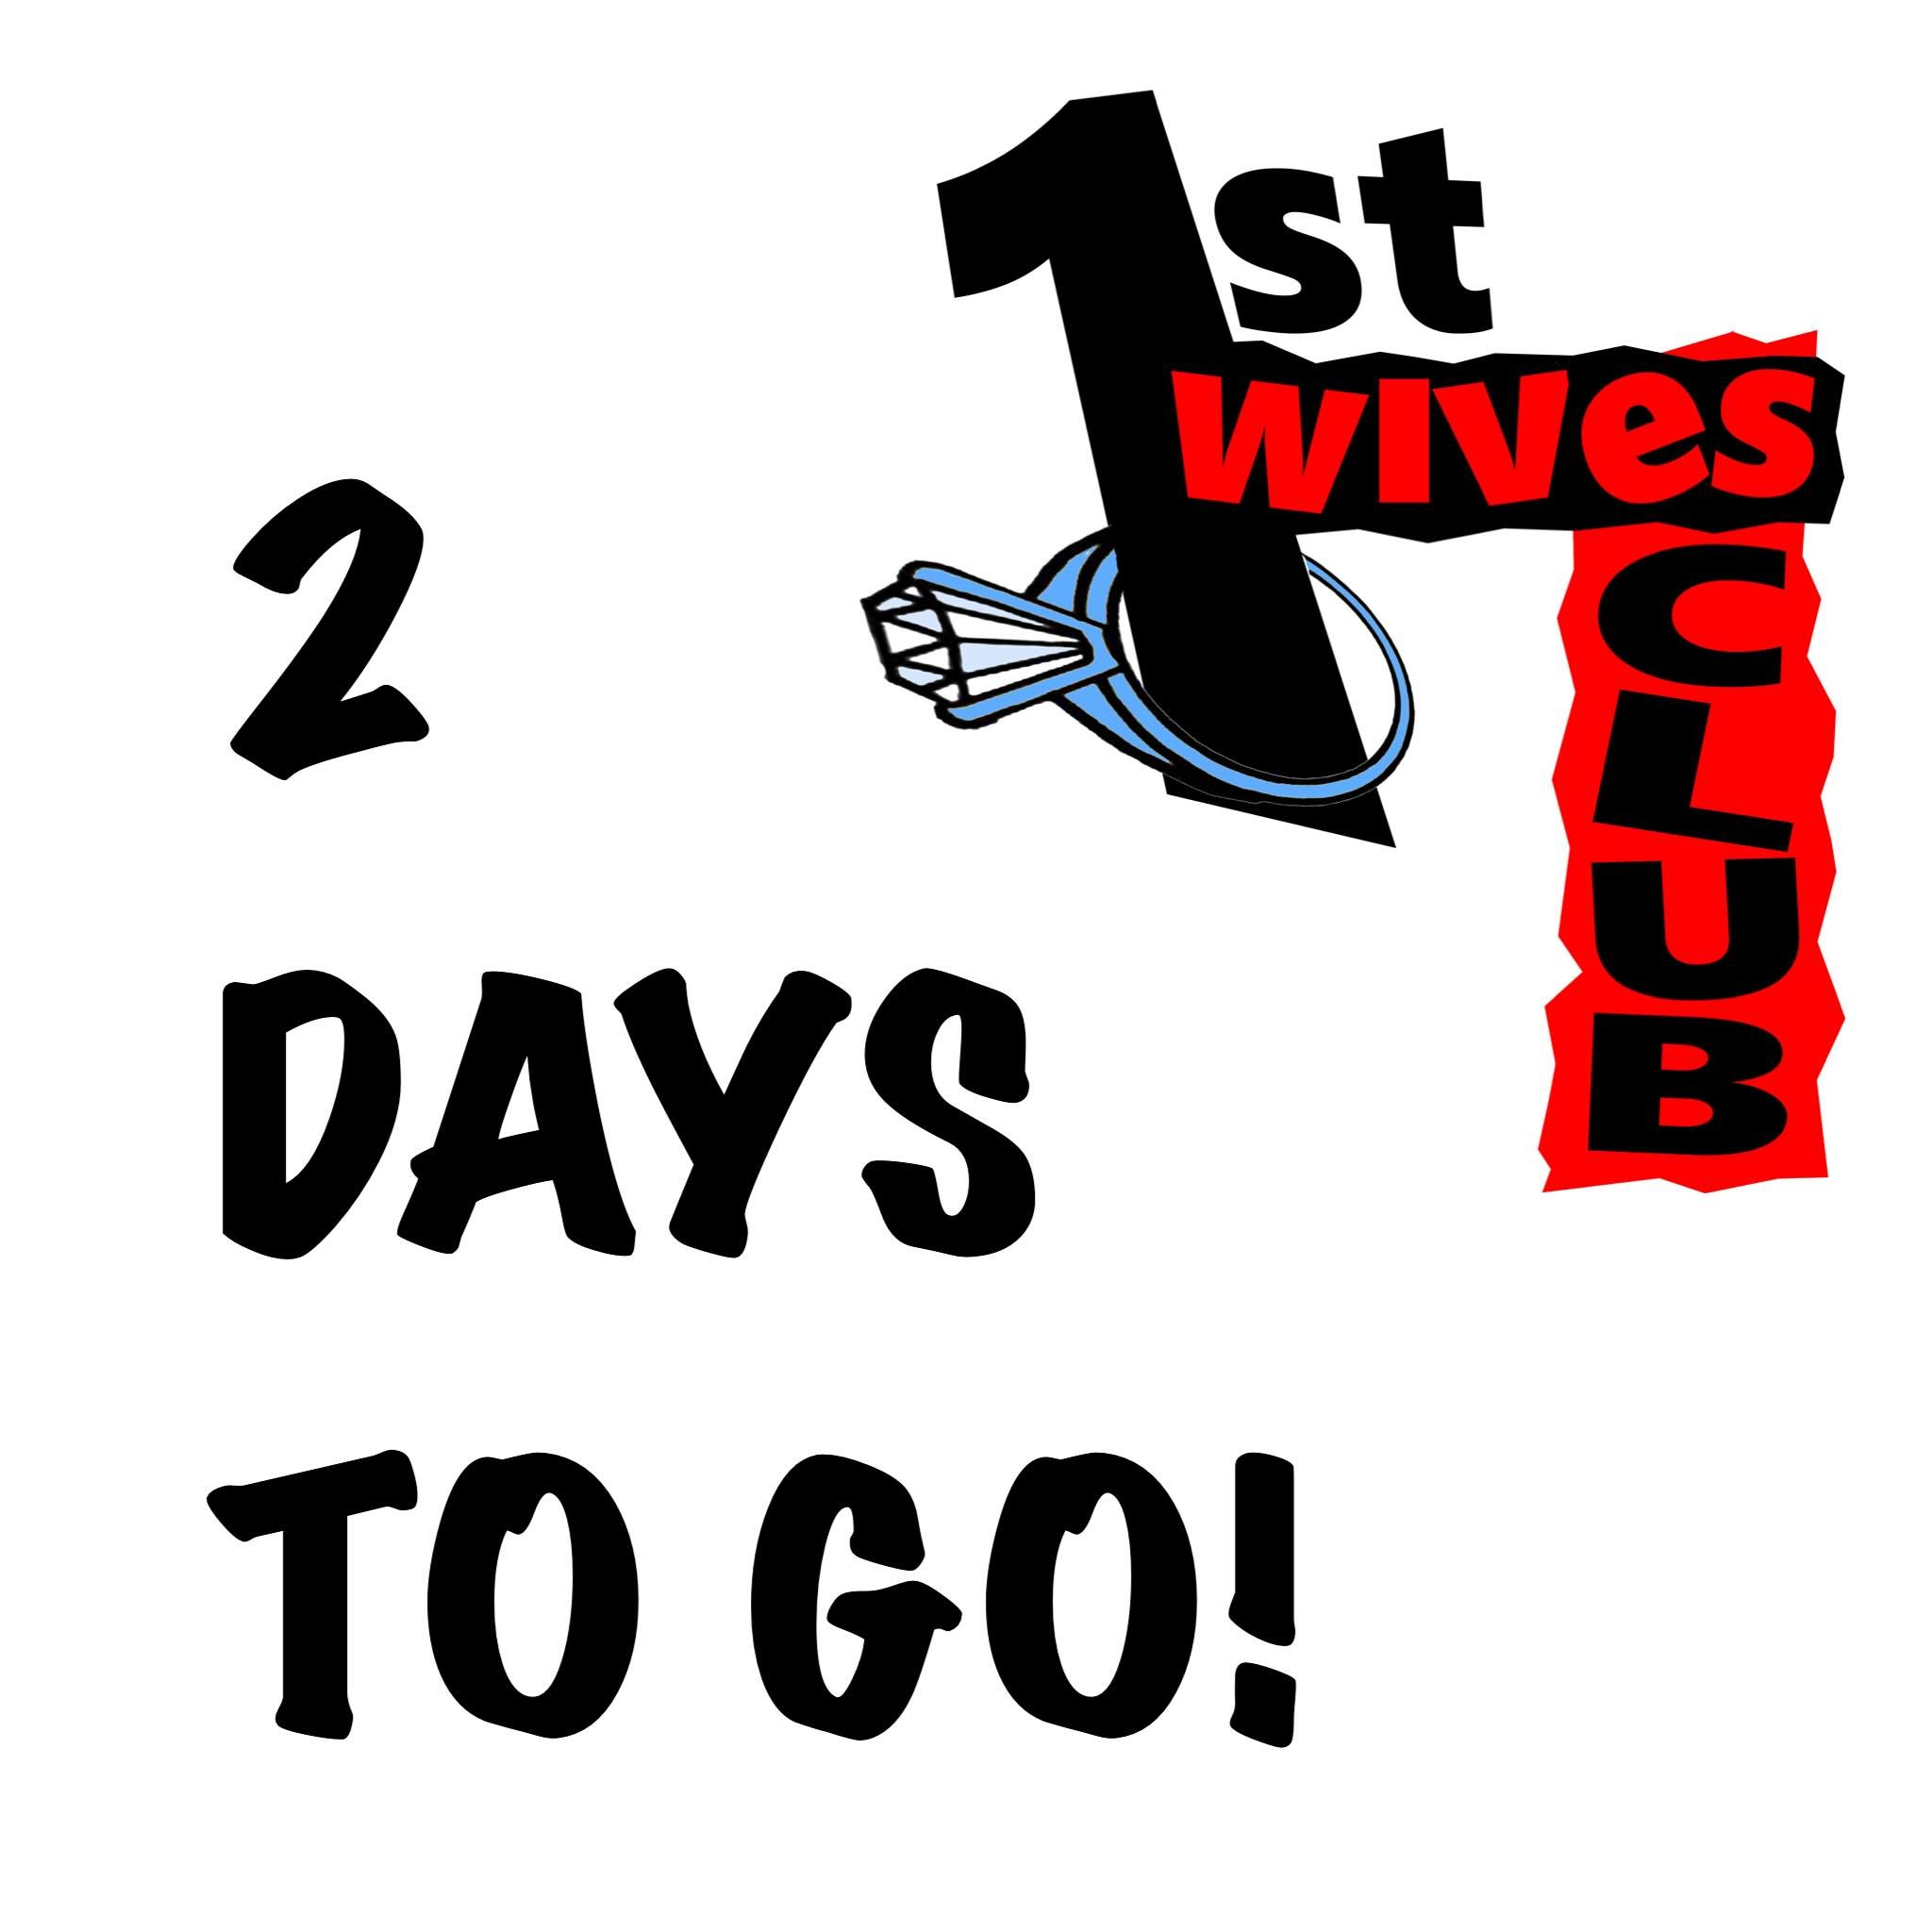 2 DAYS TO GO!! Until our next interactive film screening THE FIRST WIVES CLUB Fri 19th April 2024 at @visitfeelgoodclub Tickets selling fast, link in bio, queens!